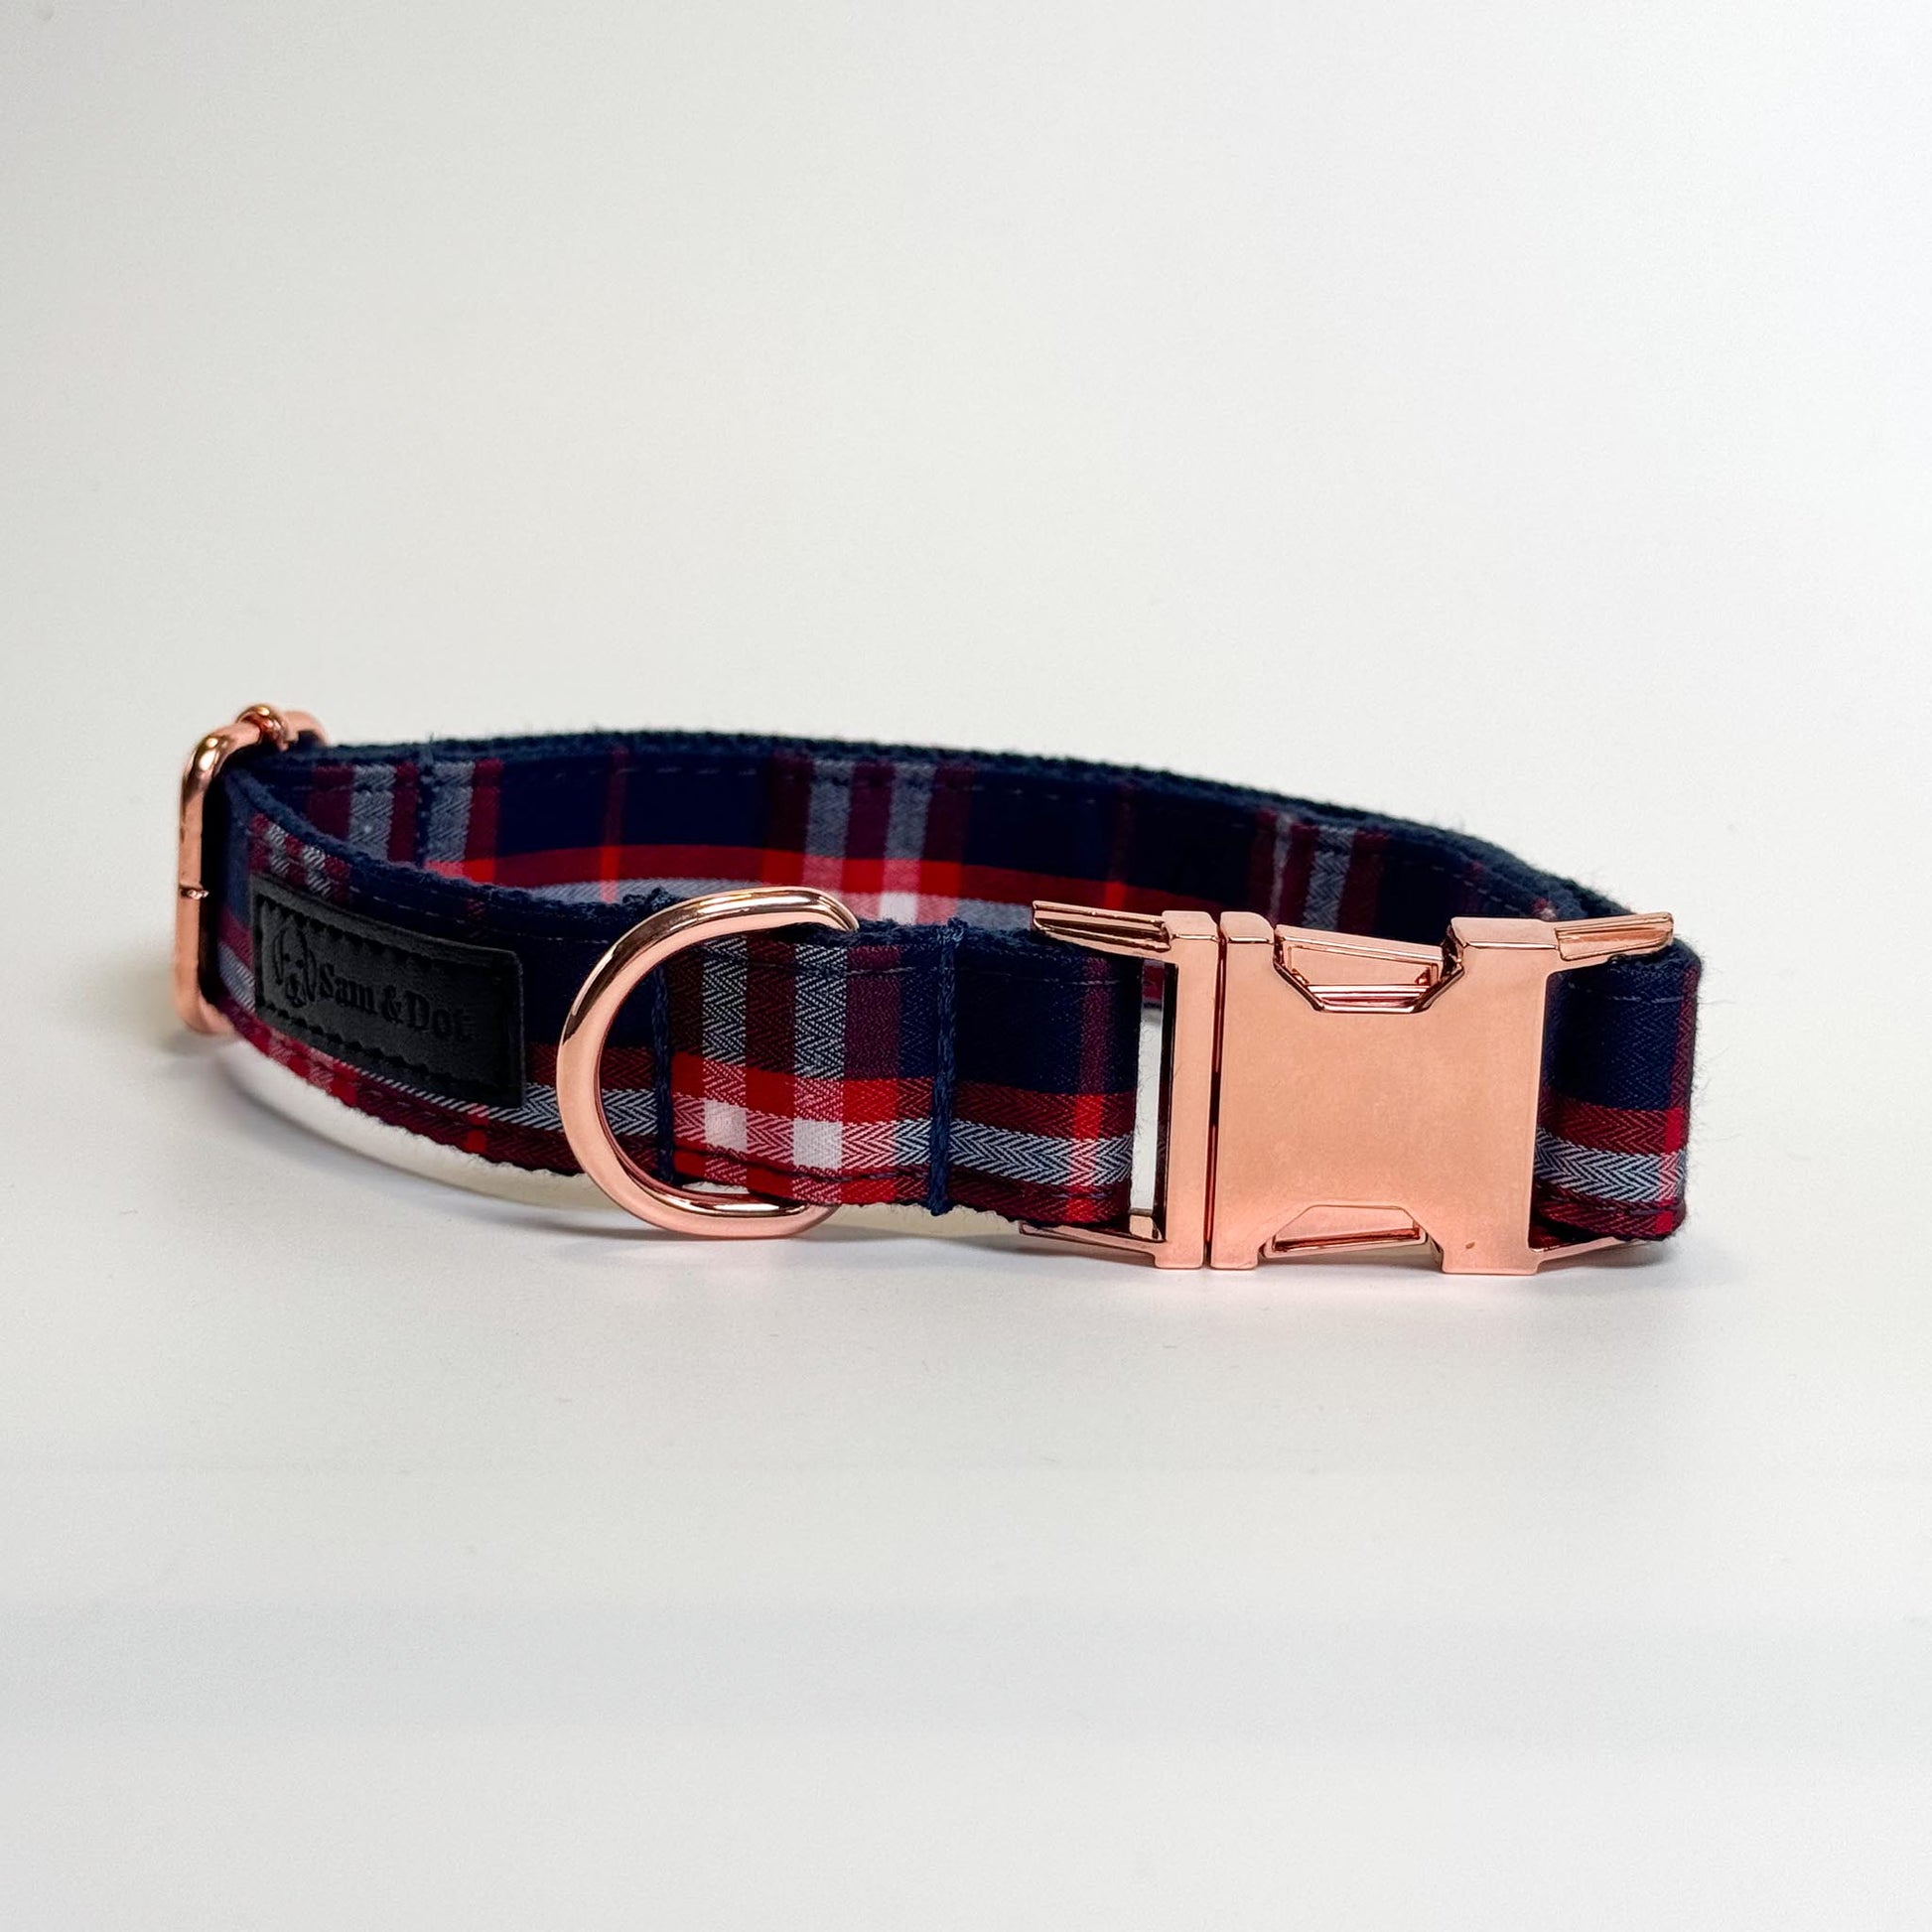 Great Scot Engraved Dog Collar - Sam and Dot